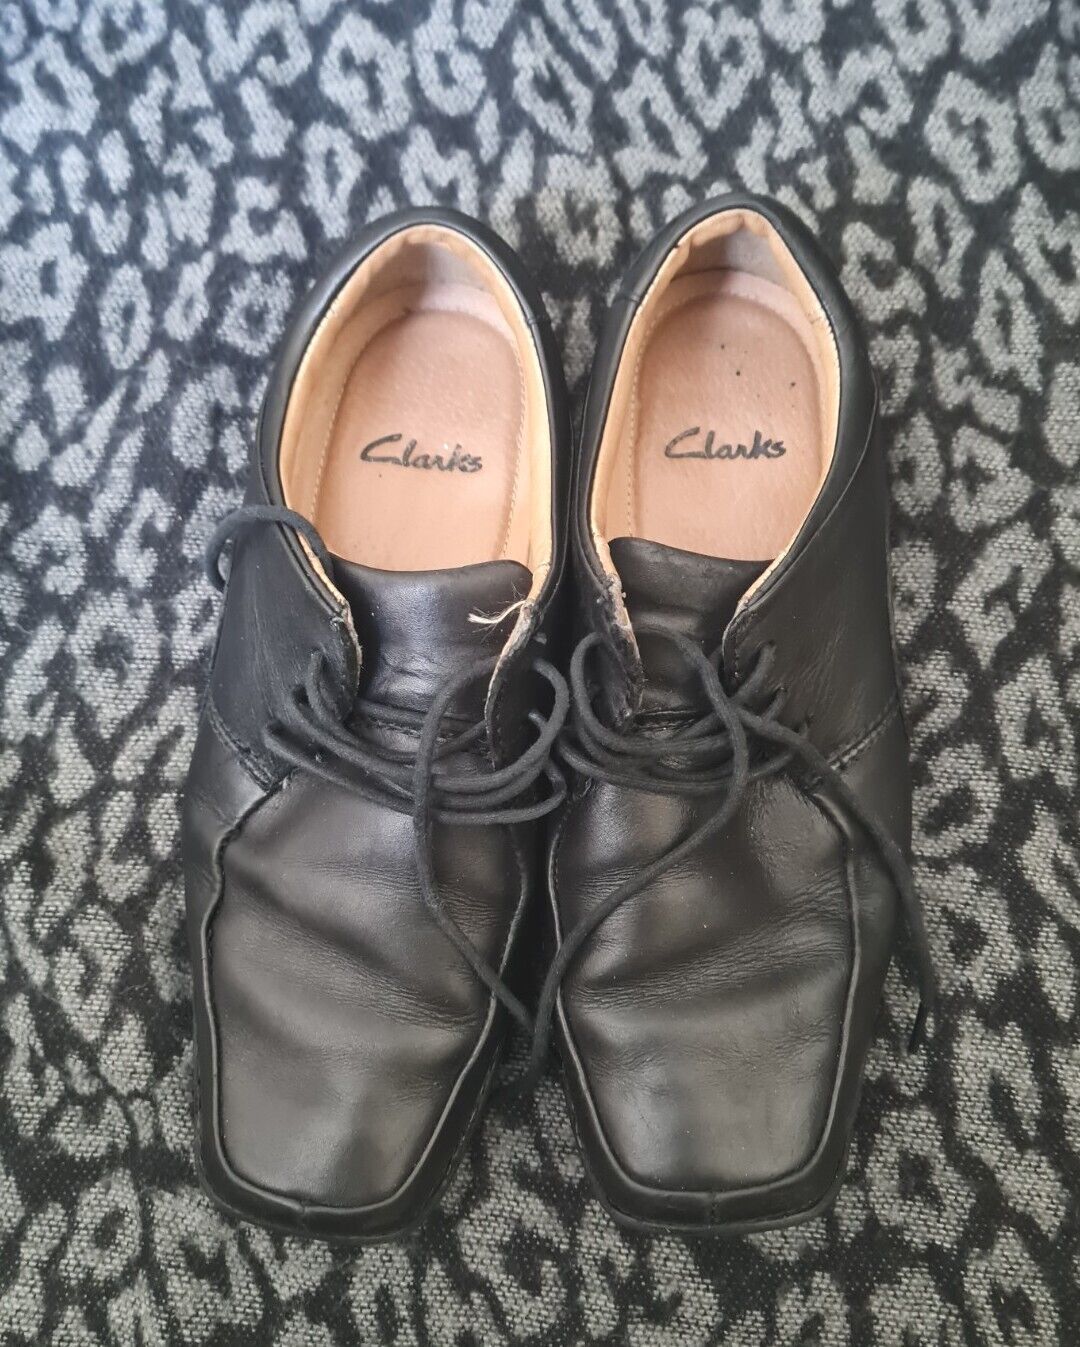 Primary image for Clarks Black Shoes For Men Size 7(uk)